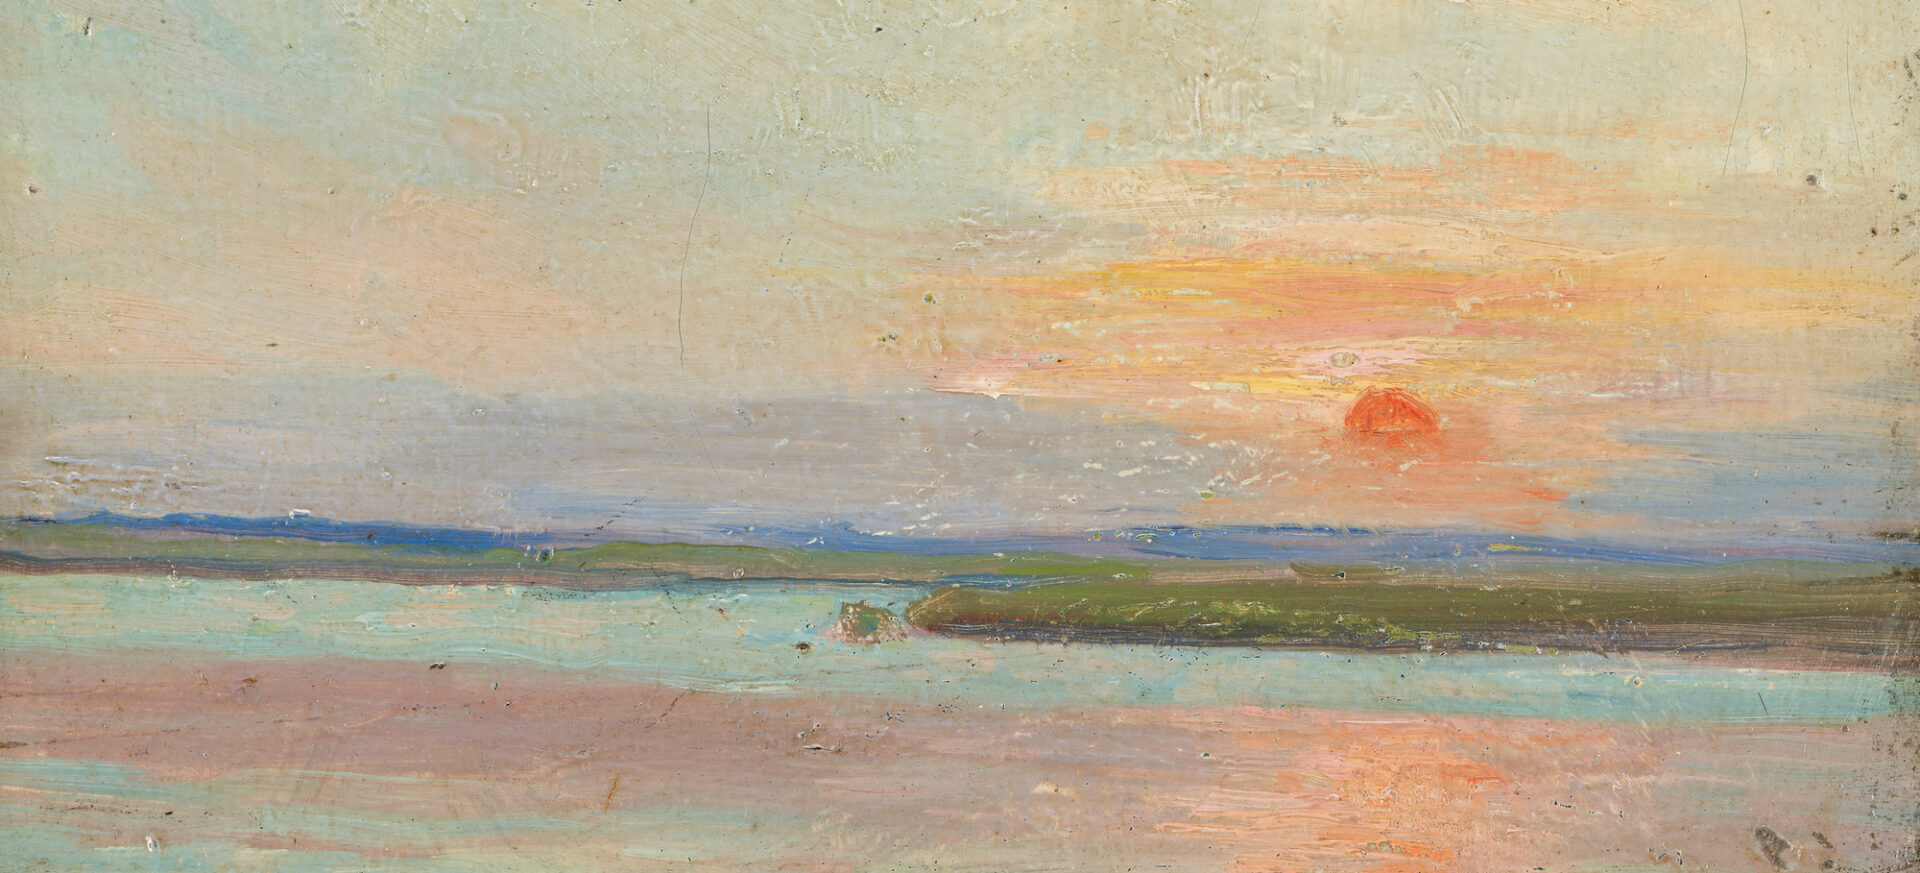 Lot 856: Ora Coltman O/B, Sunset over Water